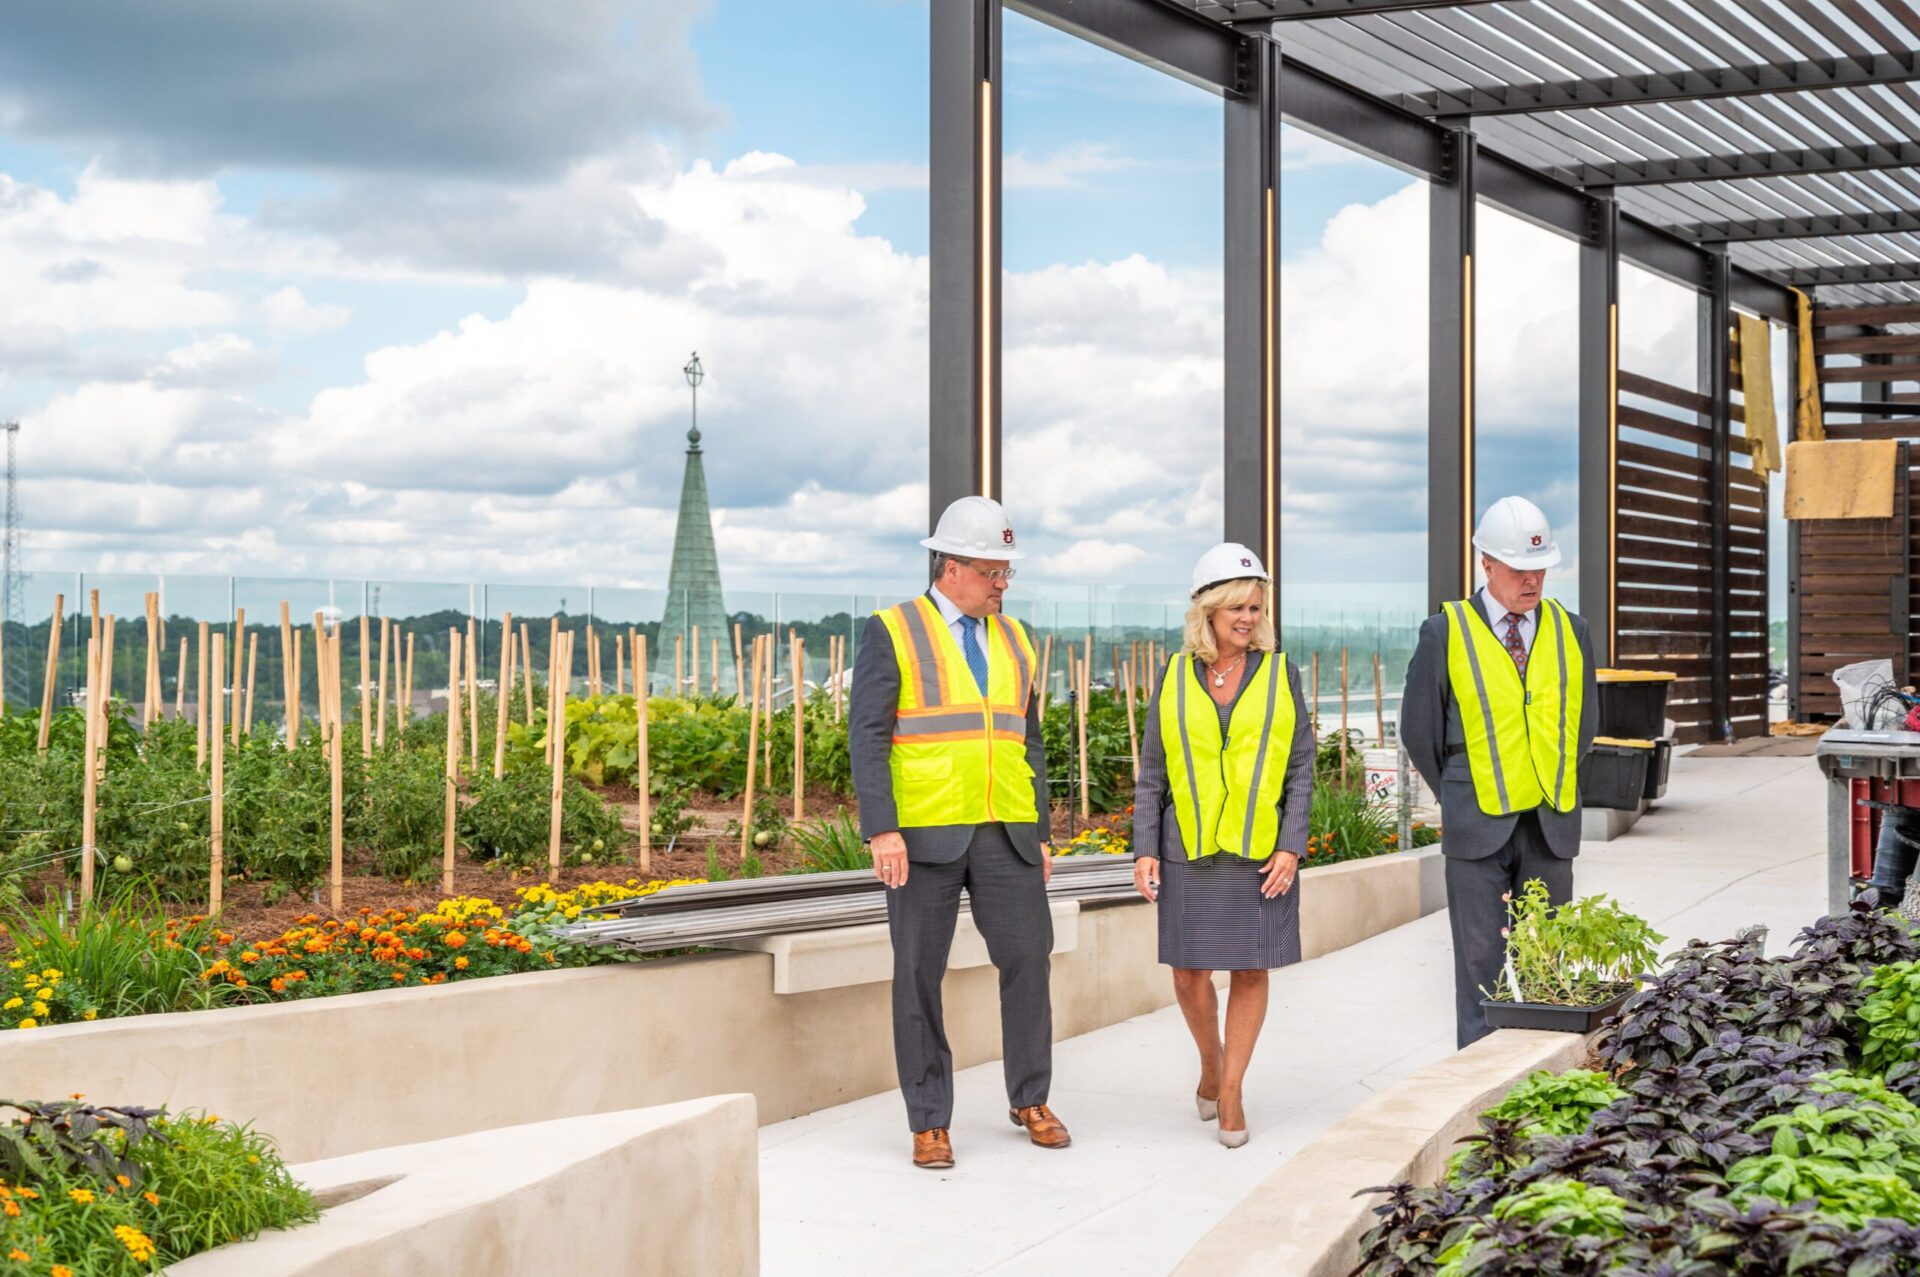 Photograph of three people in construction gear walking on the rooftop terrace with garden behind them